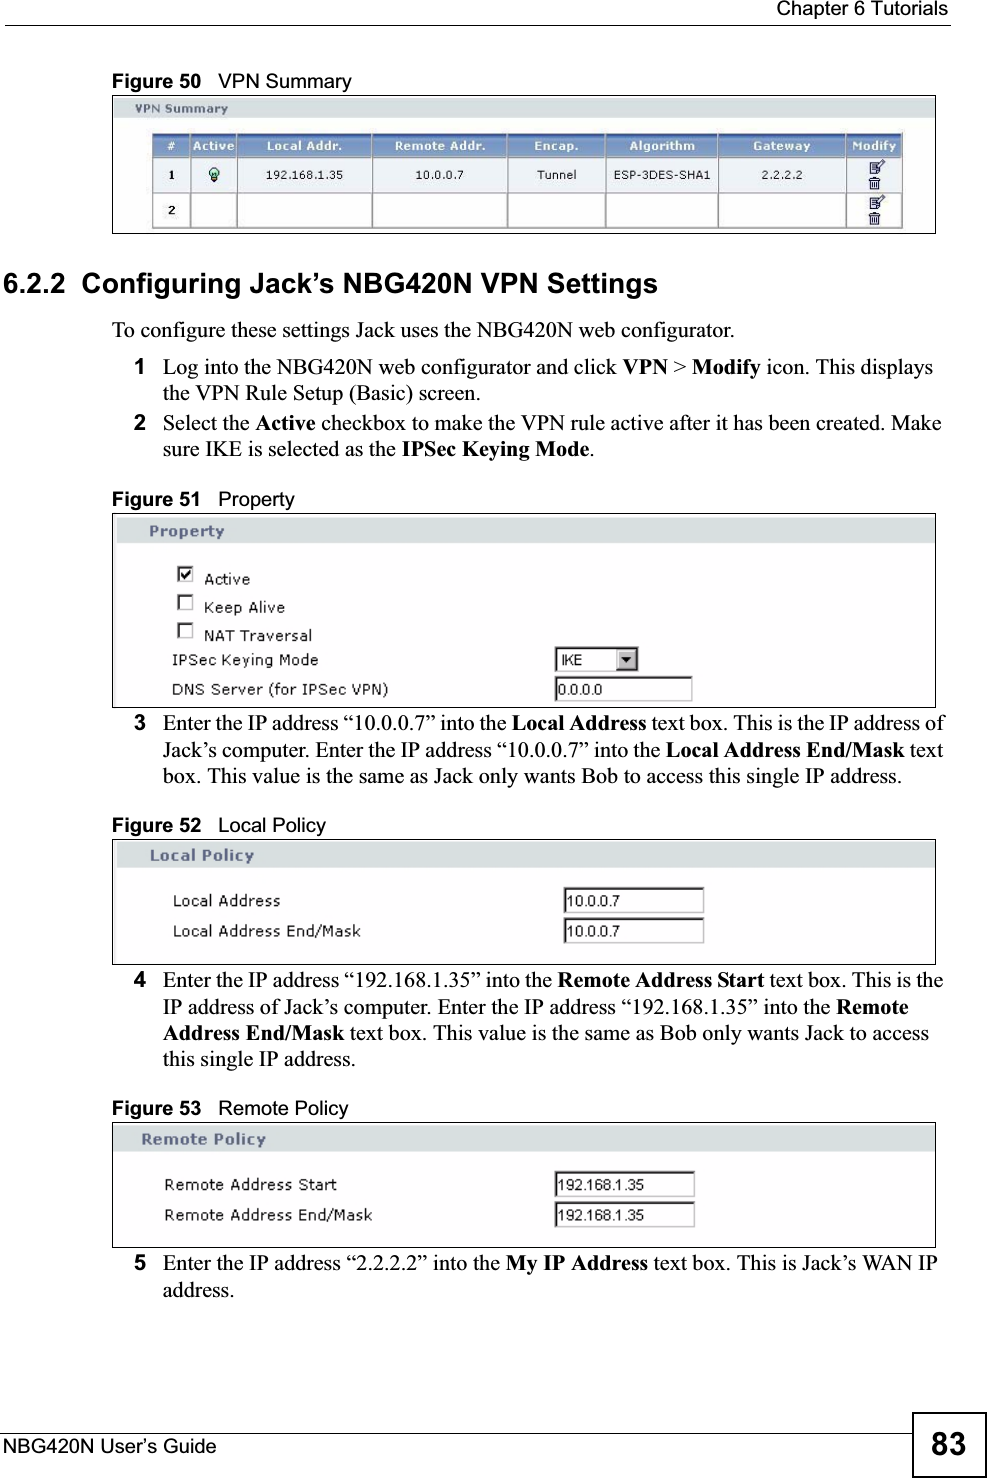  Chapter 6 TutorialsNBG420N User’s Guide 83Figure 50   VPN Summary6.2.2  Configuring Jack’s NBG420N VPN SettingsTo configure these settings Jack uses the NBG420N web configurator.1Log into the NBG420N web configurator and click VPN &gt; Modify icon. This displays the VPN Rule Setup (Basic) screen.2Select the Active checkbox to make the VPN rule active after it has been created. Make sure IKE is selected as the IPSec Keying Mode.Figure 51   Property3Enter the IP address “10.0.0.7” into the Local Address text box. This is the IP address of Jack’s computer. Enter the IP address “10.0.0.7” into the Local Address End/Mask text box. This value is the same as Jack only wants Bob to access this single IP address.Figure 52   Local Policy4Enter the IP address “192.168.1.35” into the Remote Address Start text box. This is the IP address of Jack’s computer. Enter the IP address “192.168.1.35” into the Remote Address End/Mask text box. This value is the same as Bob only wants Jack to access this single IP address.Figure 53   Remote Policy5Enter the IP address “2.2.2.2” into the My IP Address text box. This is Jack’s WAN IP address.